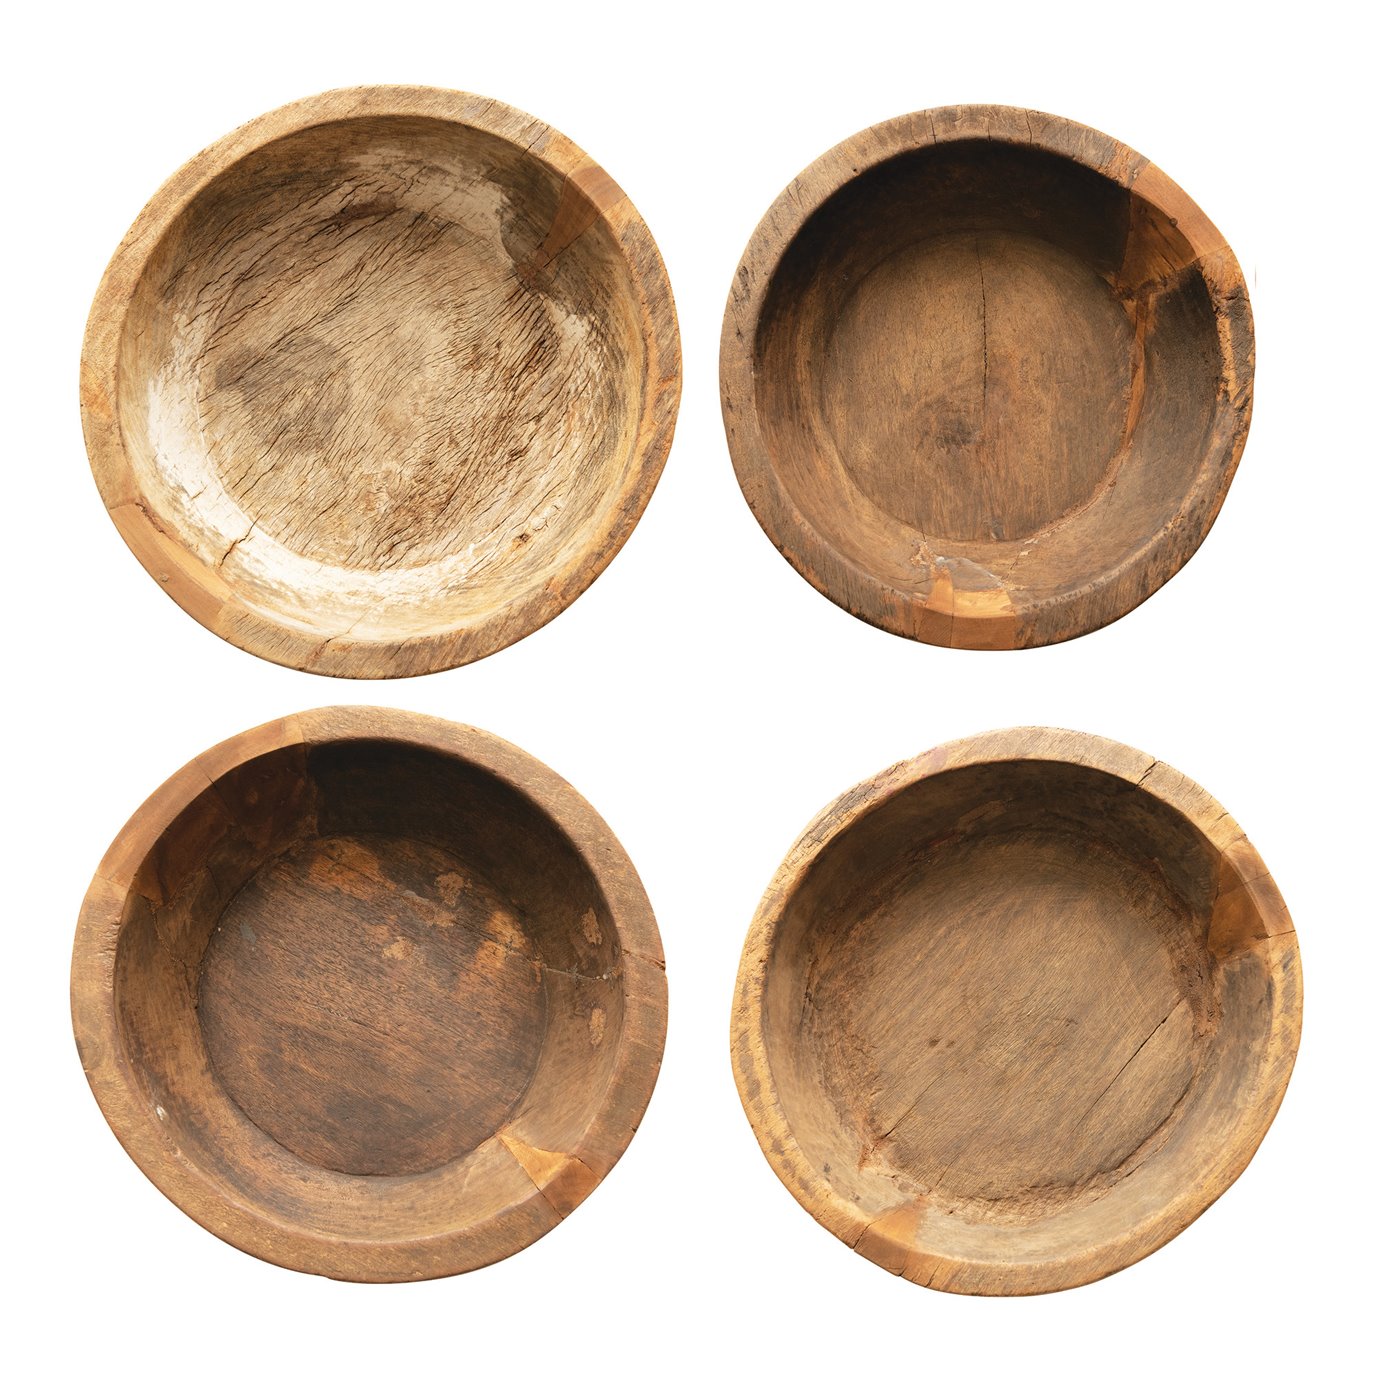 Approximately 20" Round Found Teak Wood Bowl (Each One Will Vary)